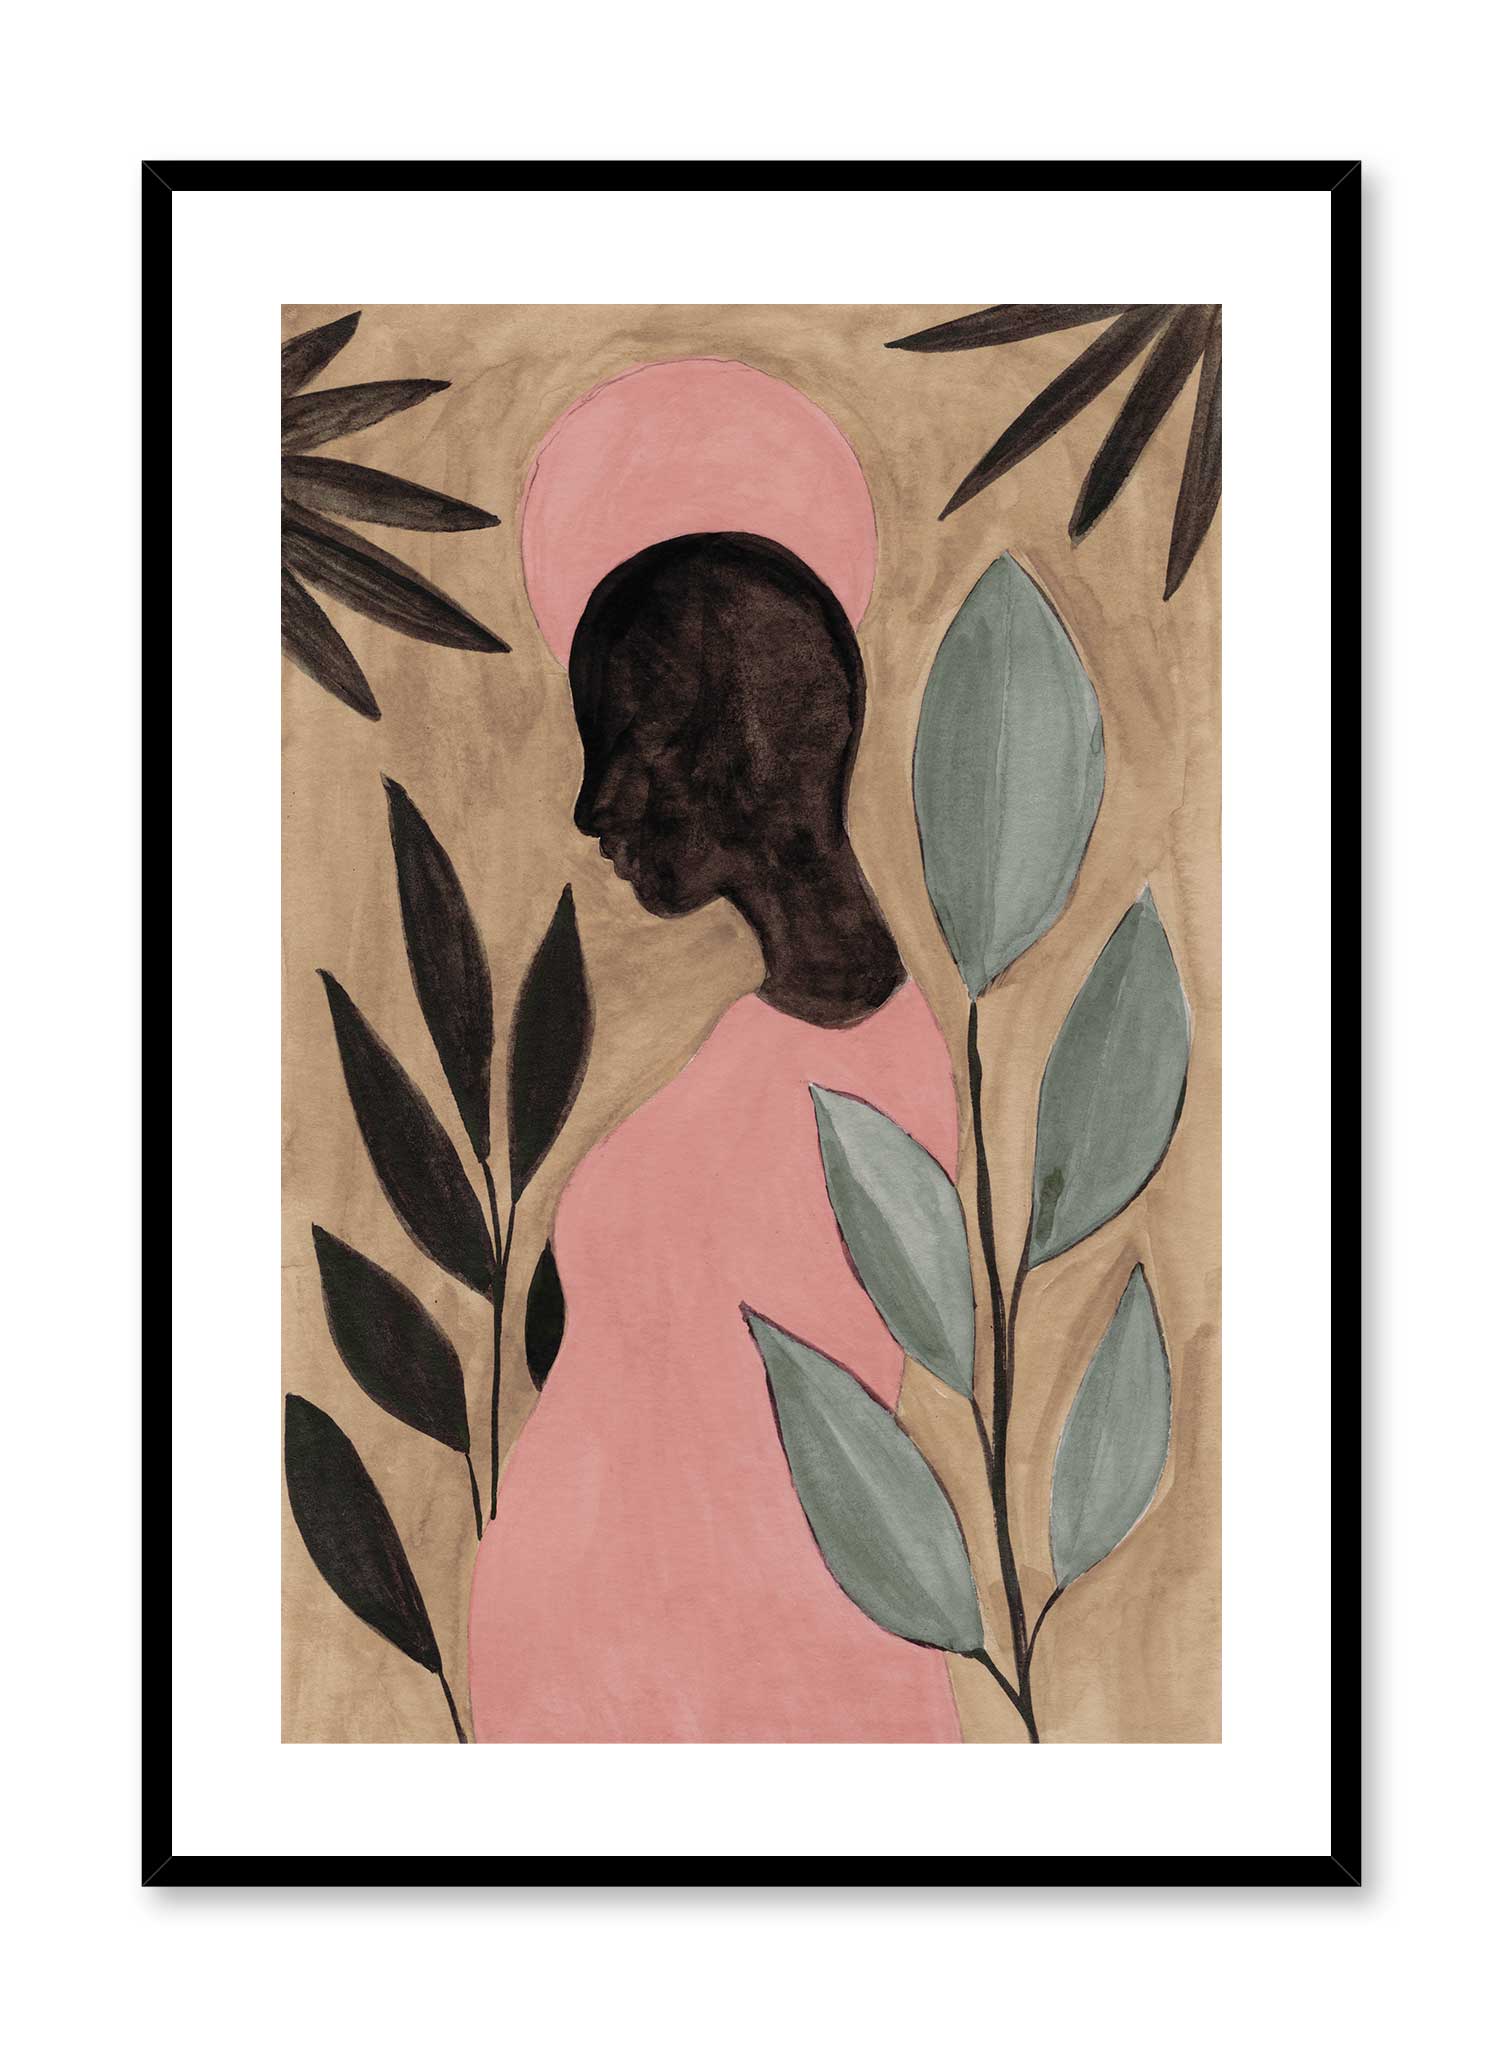 Ala is a minimalist illustration of a woman wearing a pink dress where her baby bump can be seen as she stands in the jungle by Opposite Wall.